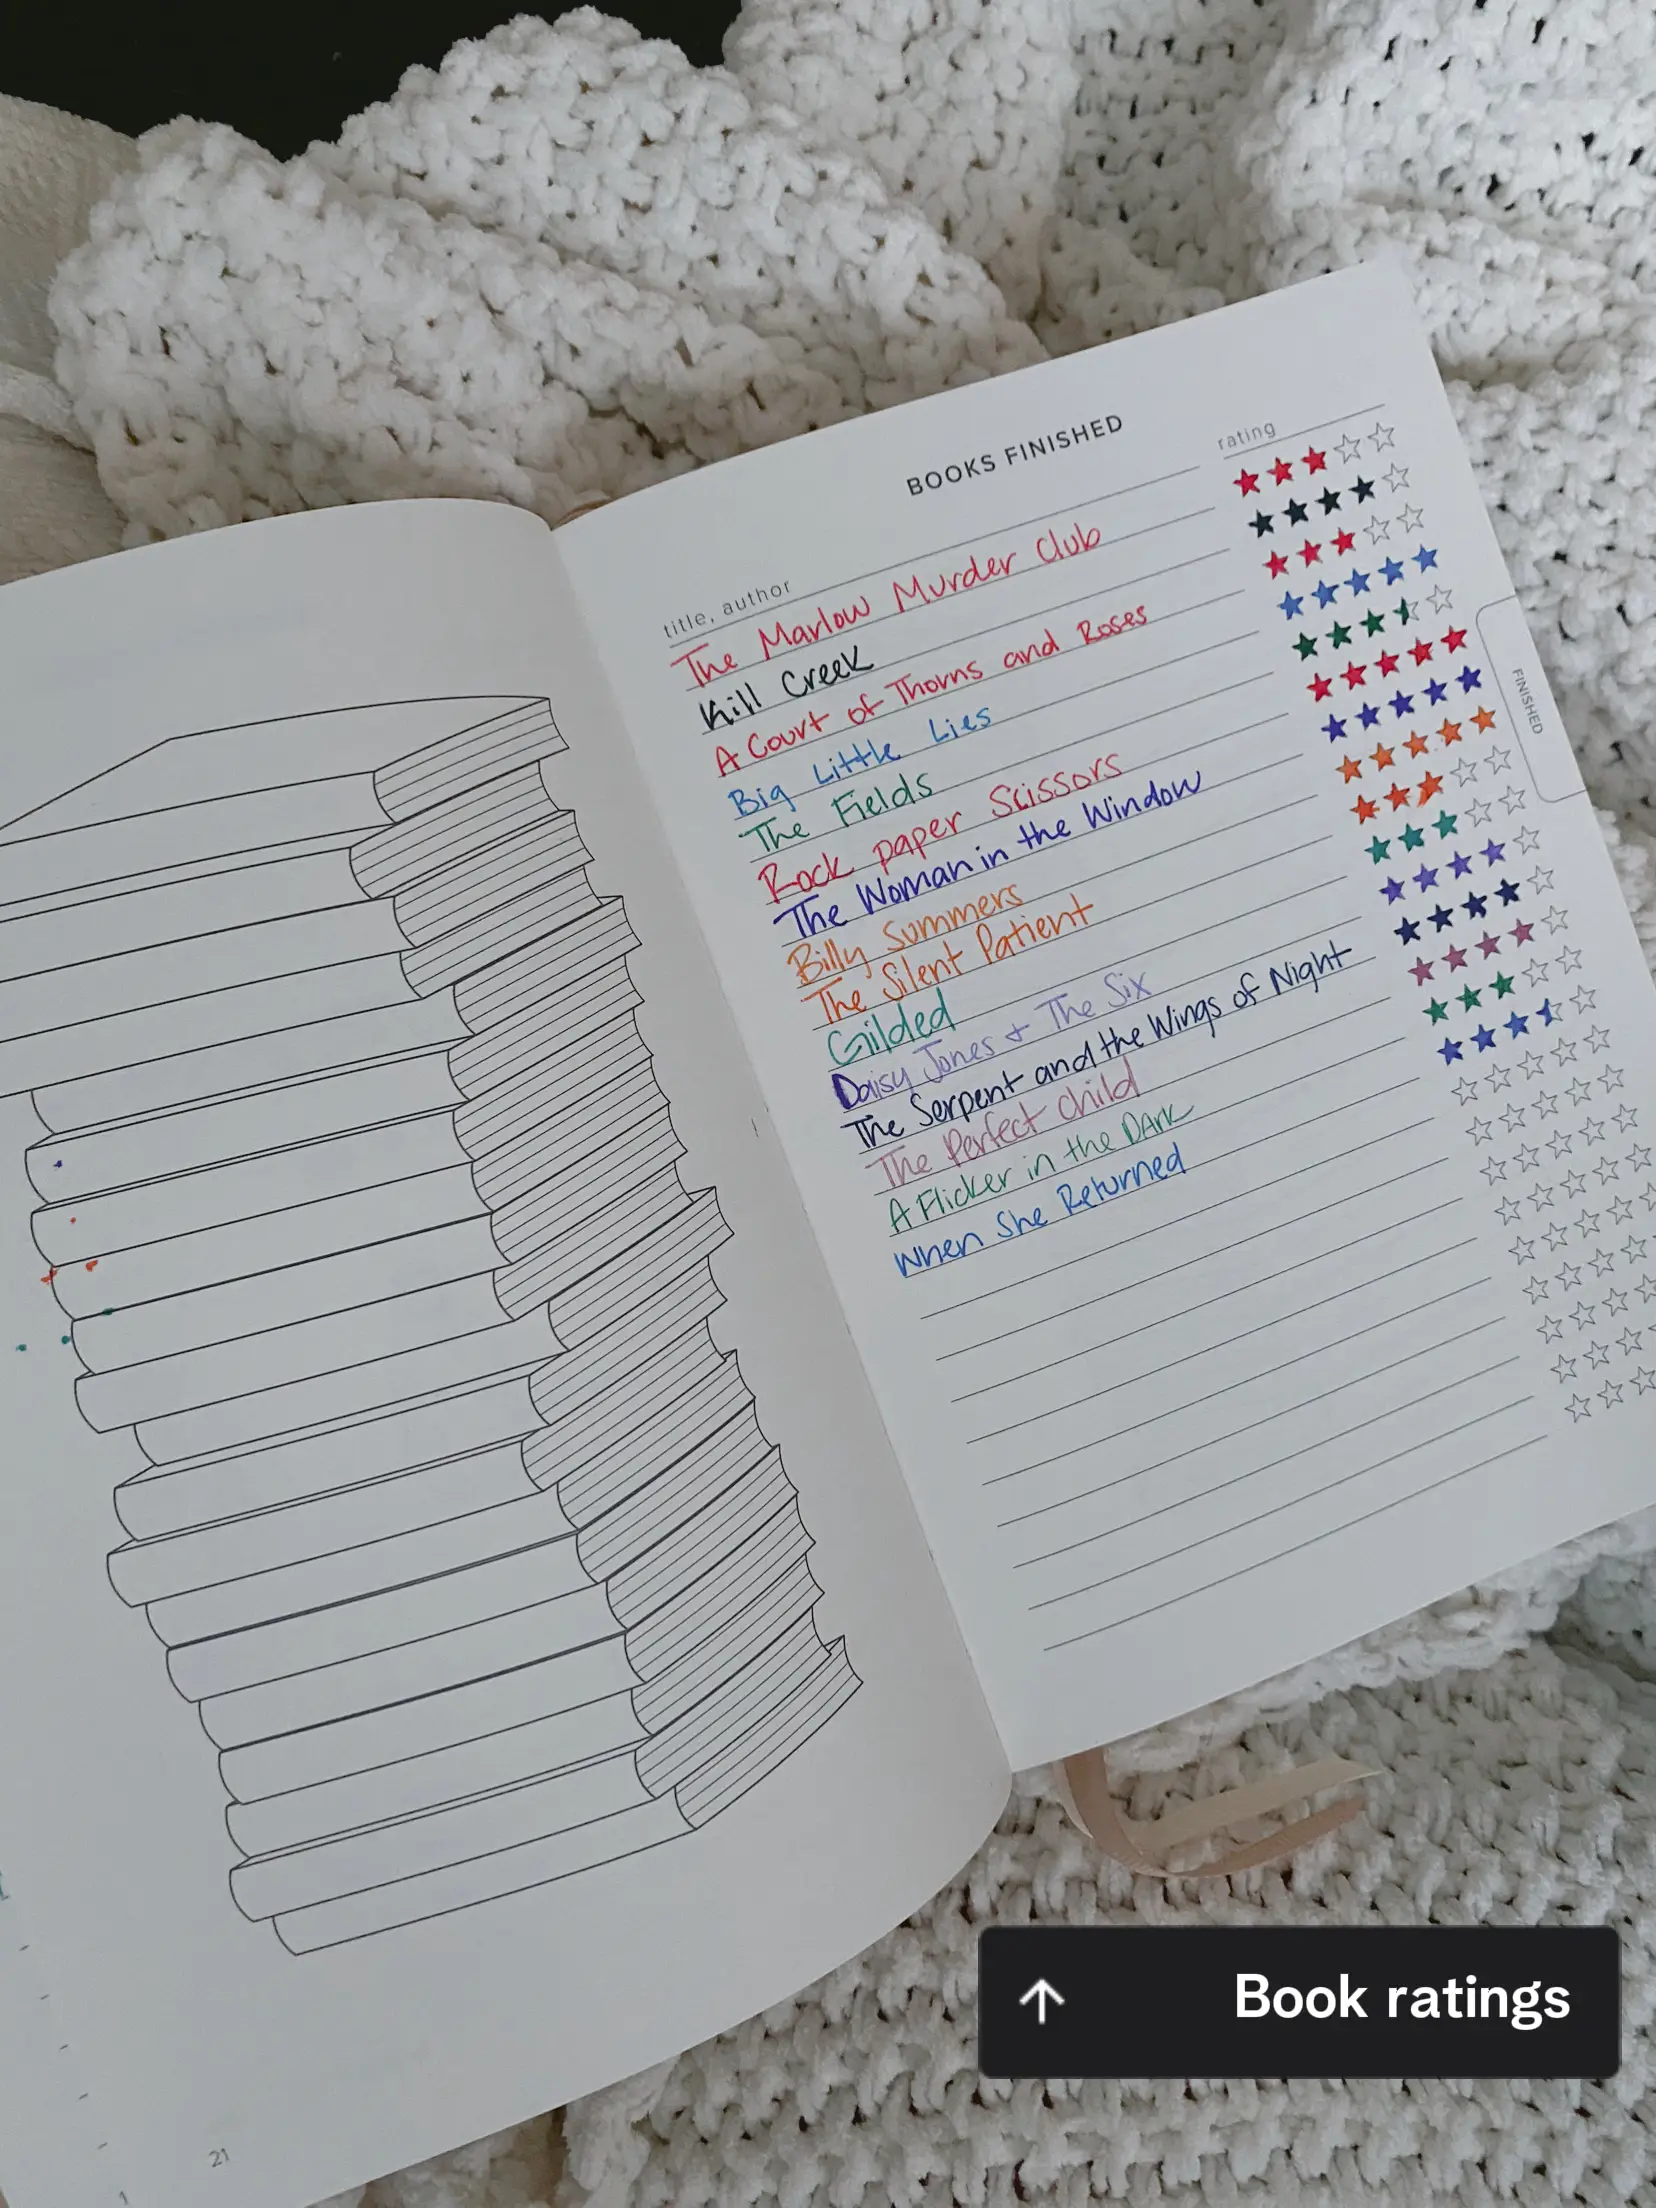 My #BookTok Reading Journal: Track and Review Your Favorite Reads